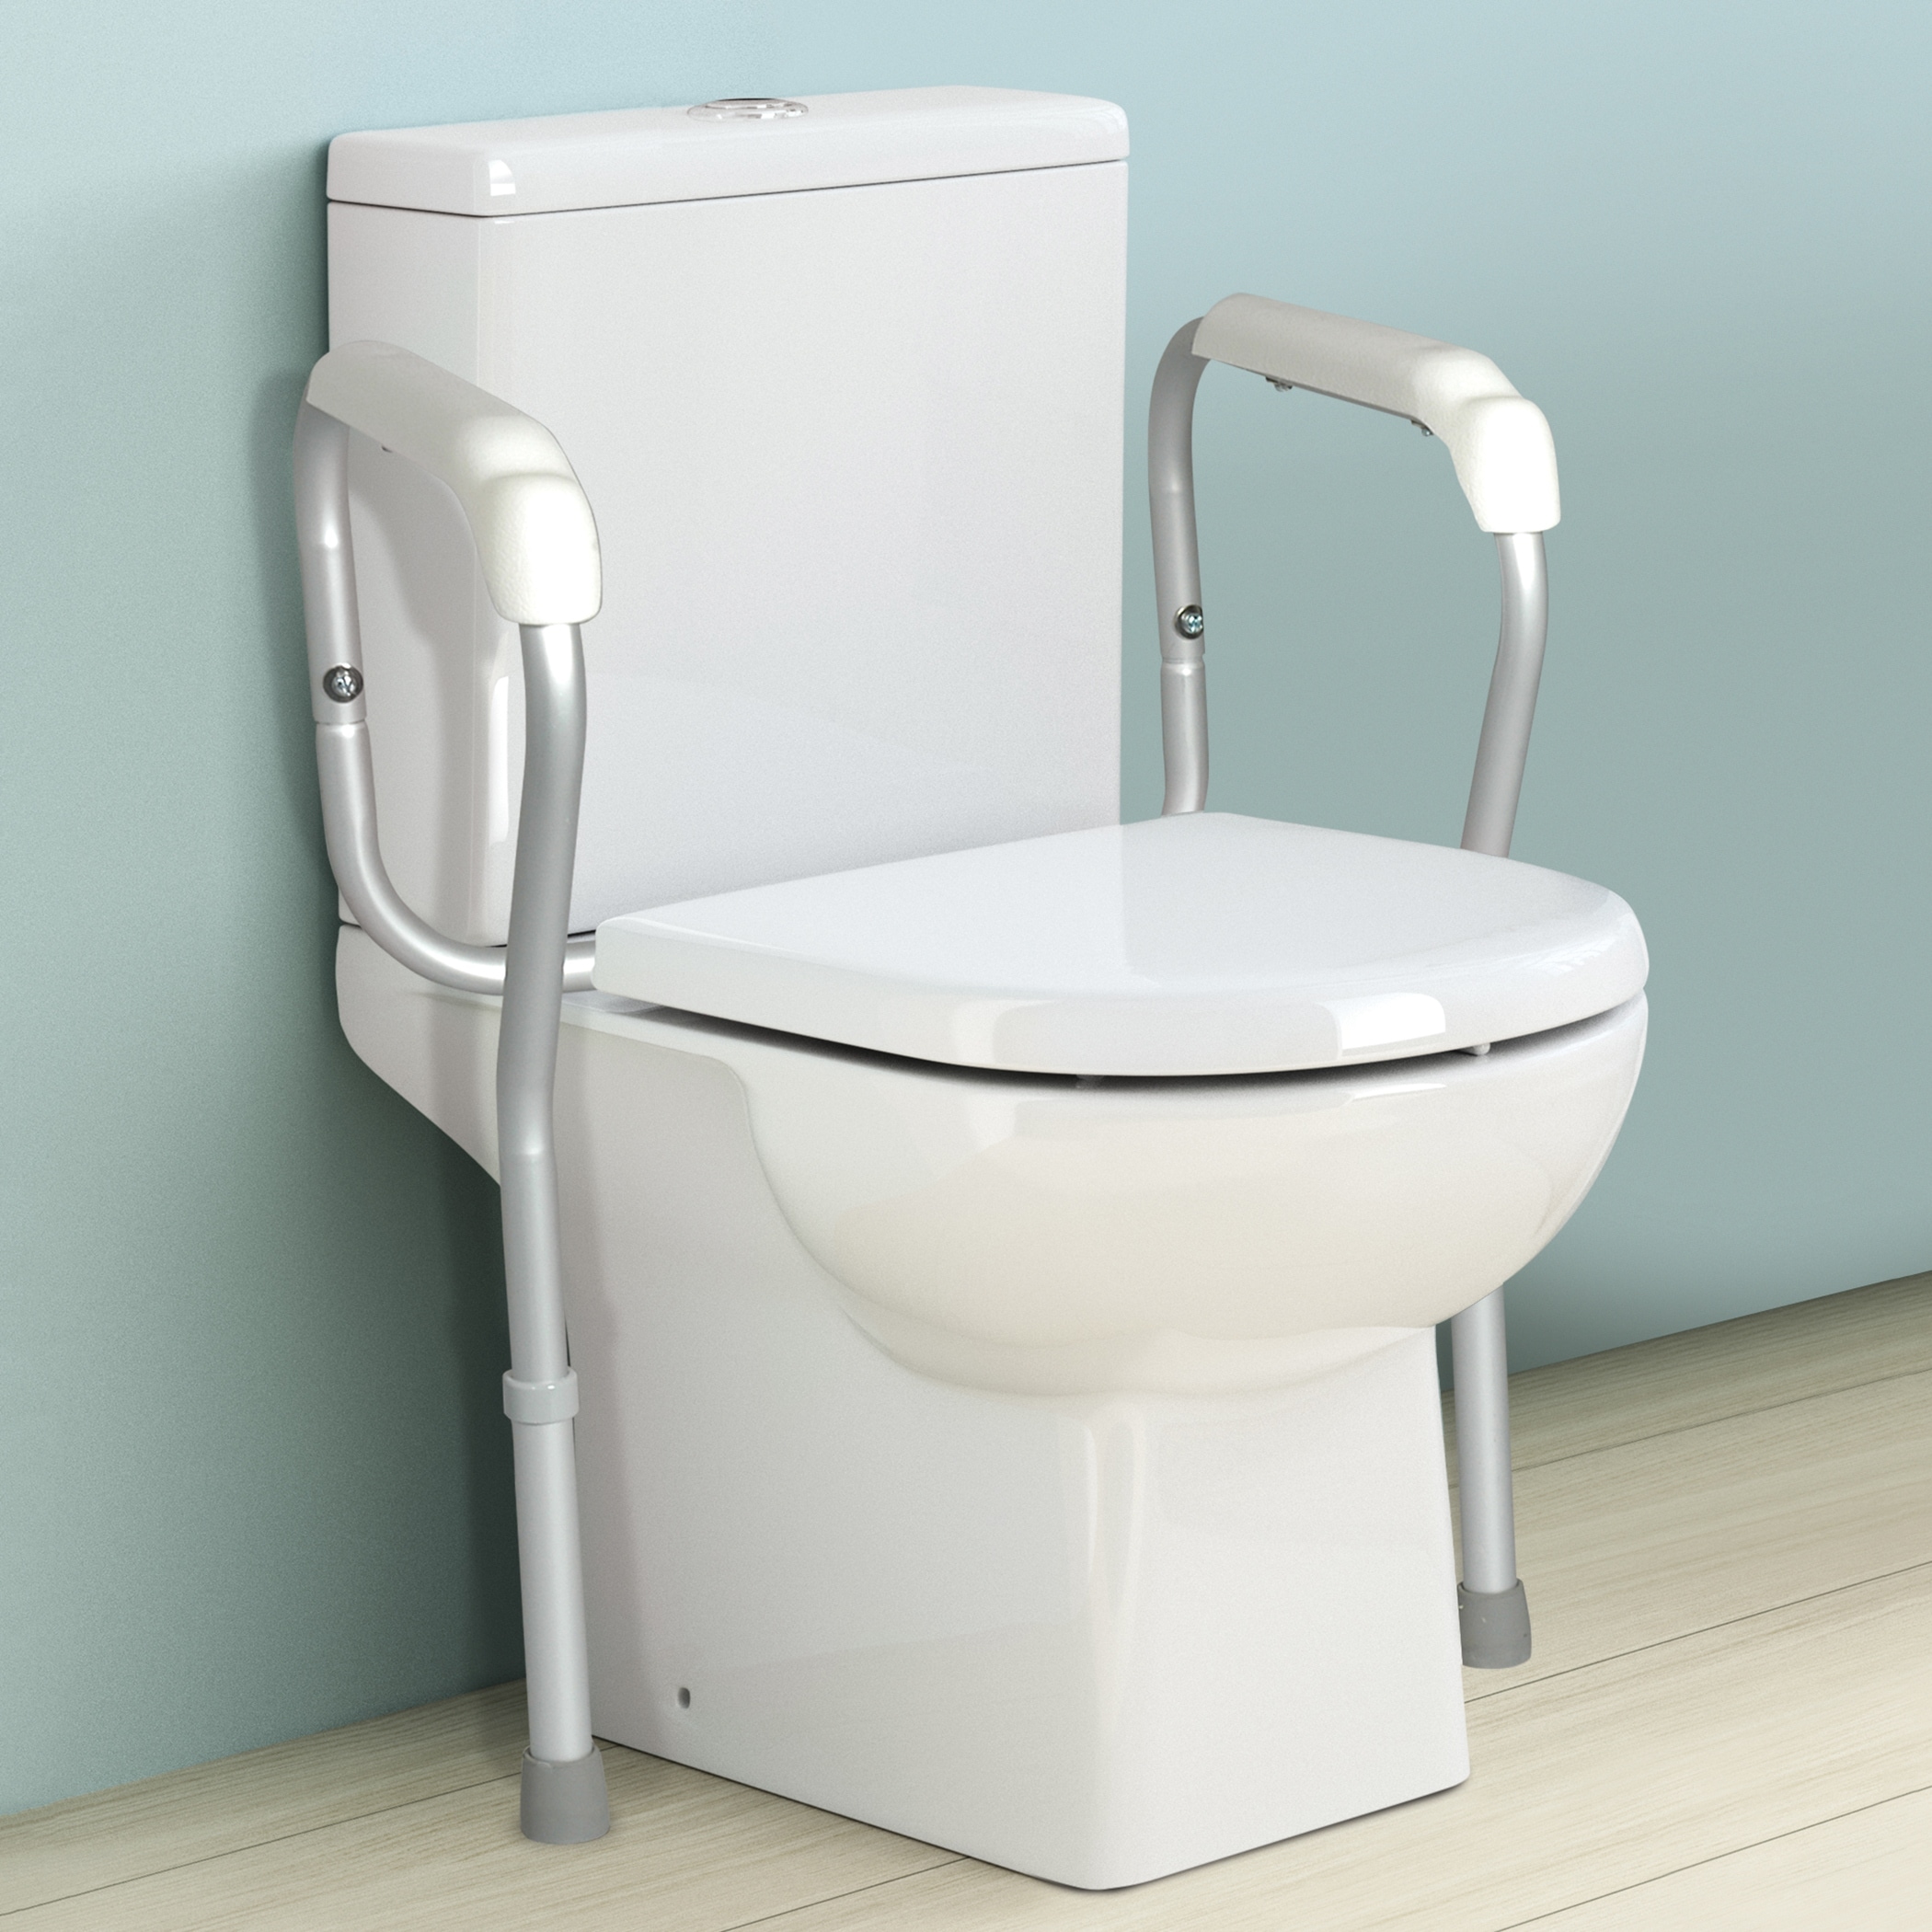 Sturdy Toilet Safety Frame with Height Adjustable Handles - 21.500 x 15.000 x 13.500